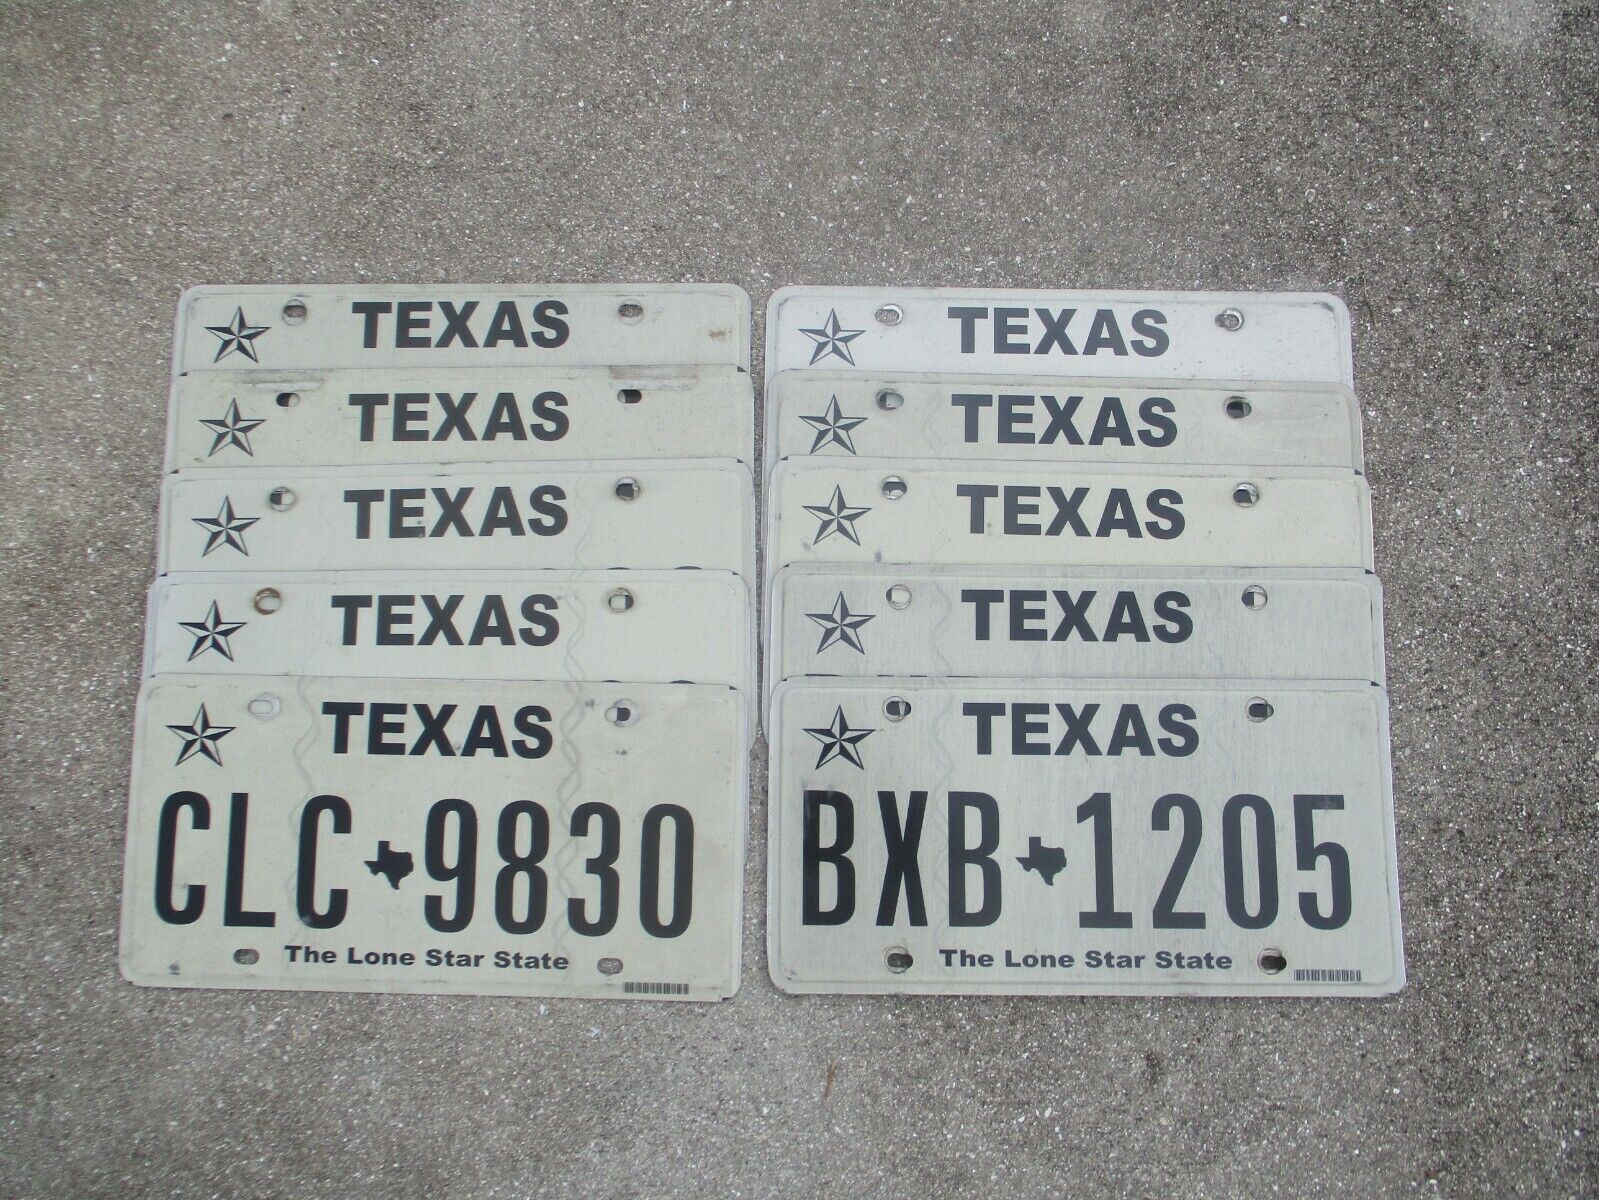 1 (one) Texas license plate  of MY choice and number